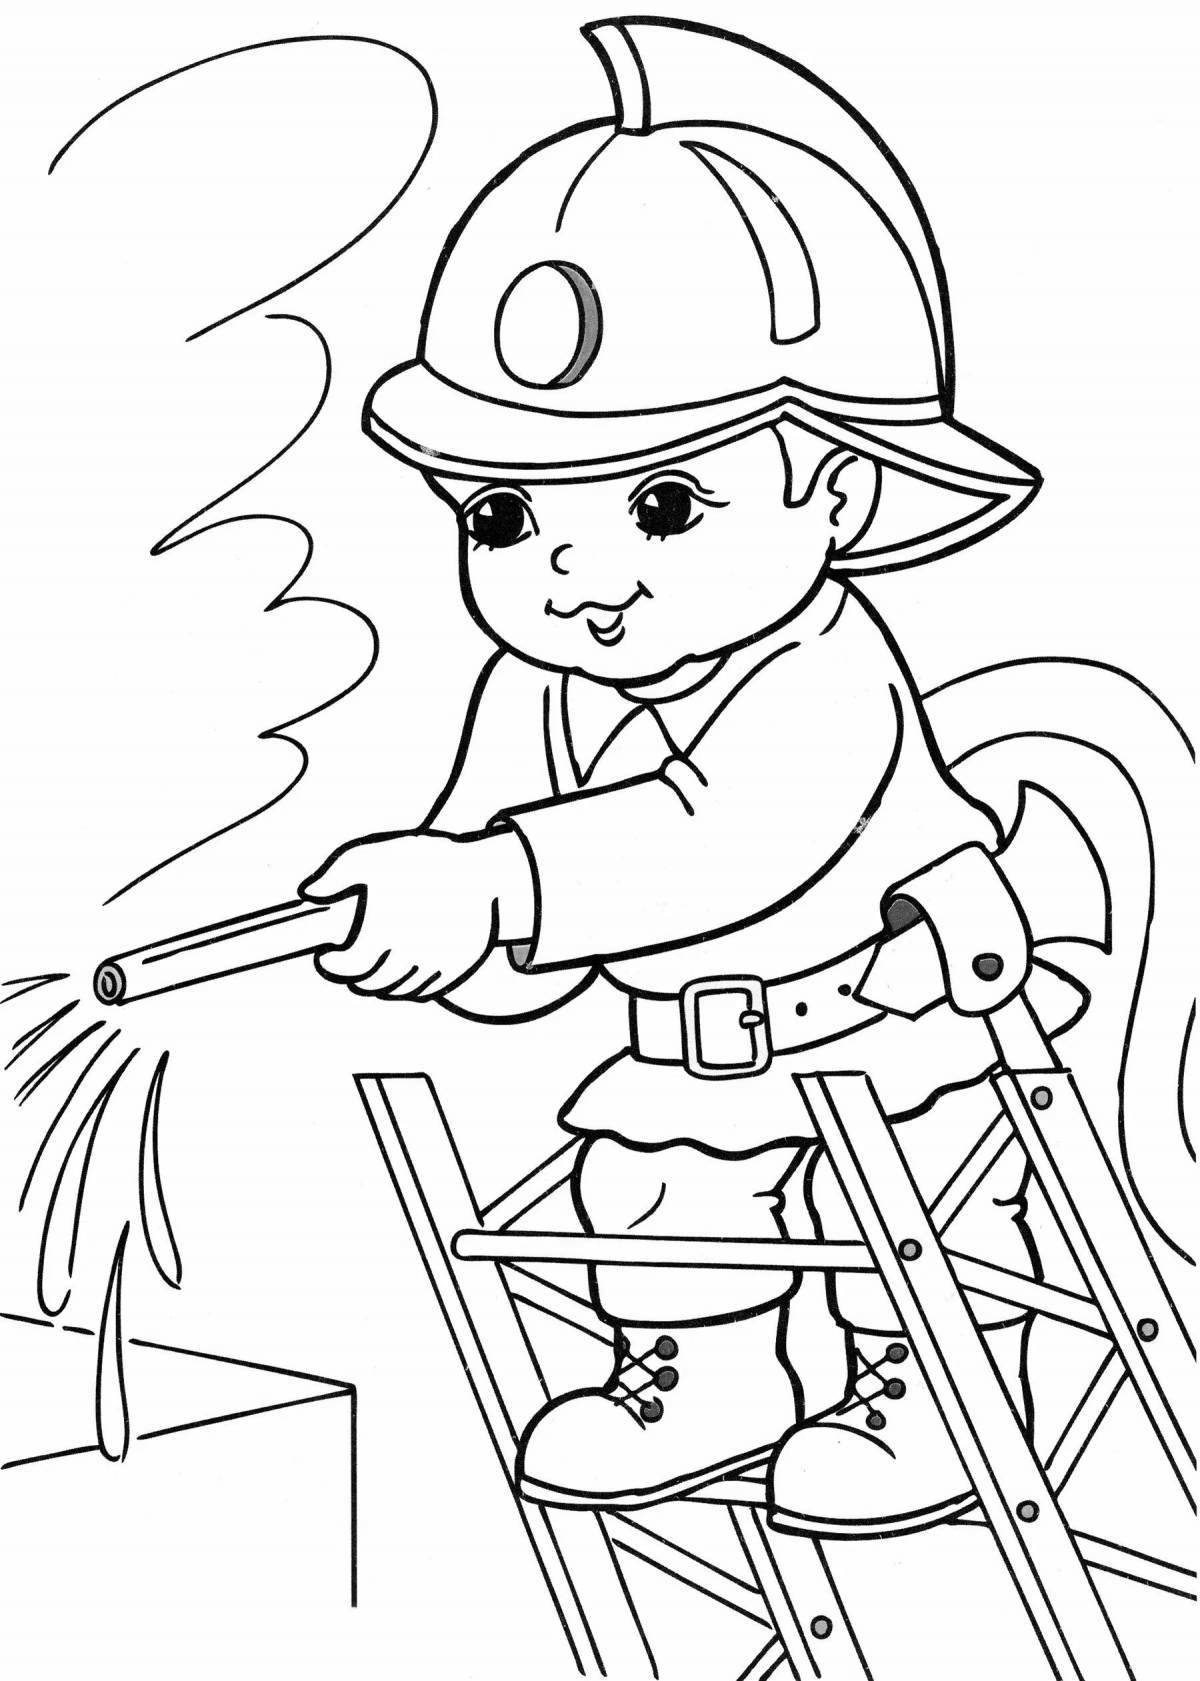 Innovative firefighter coloring book for kids